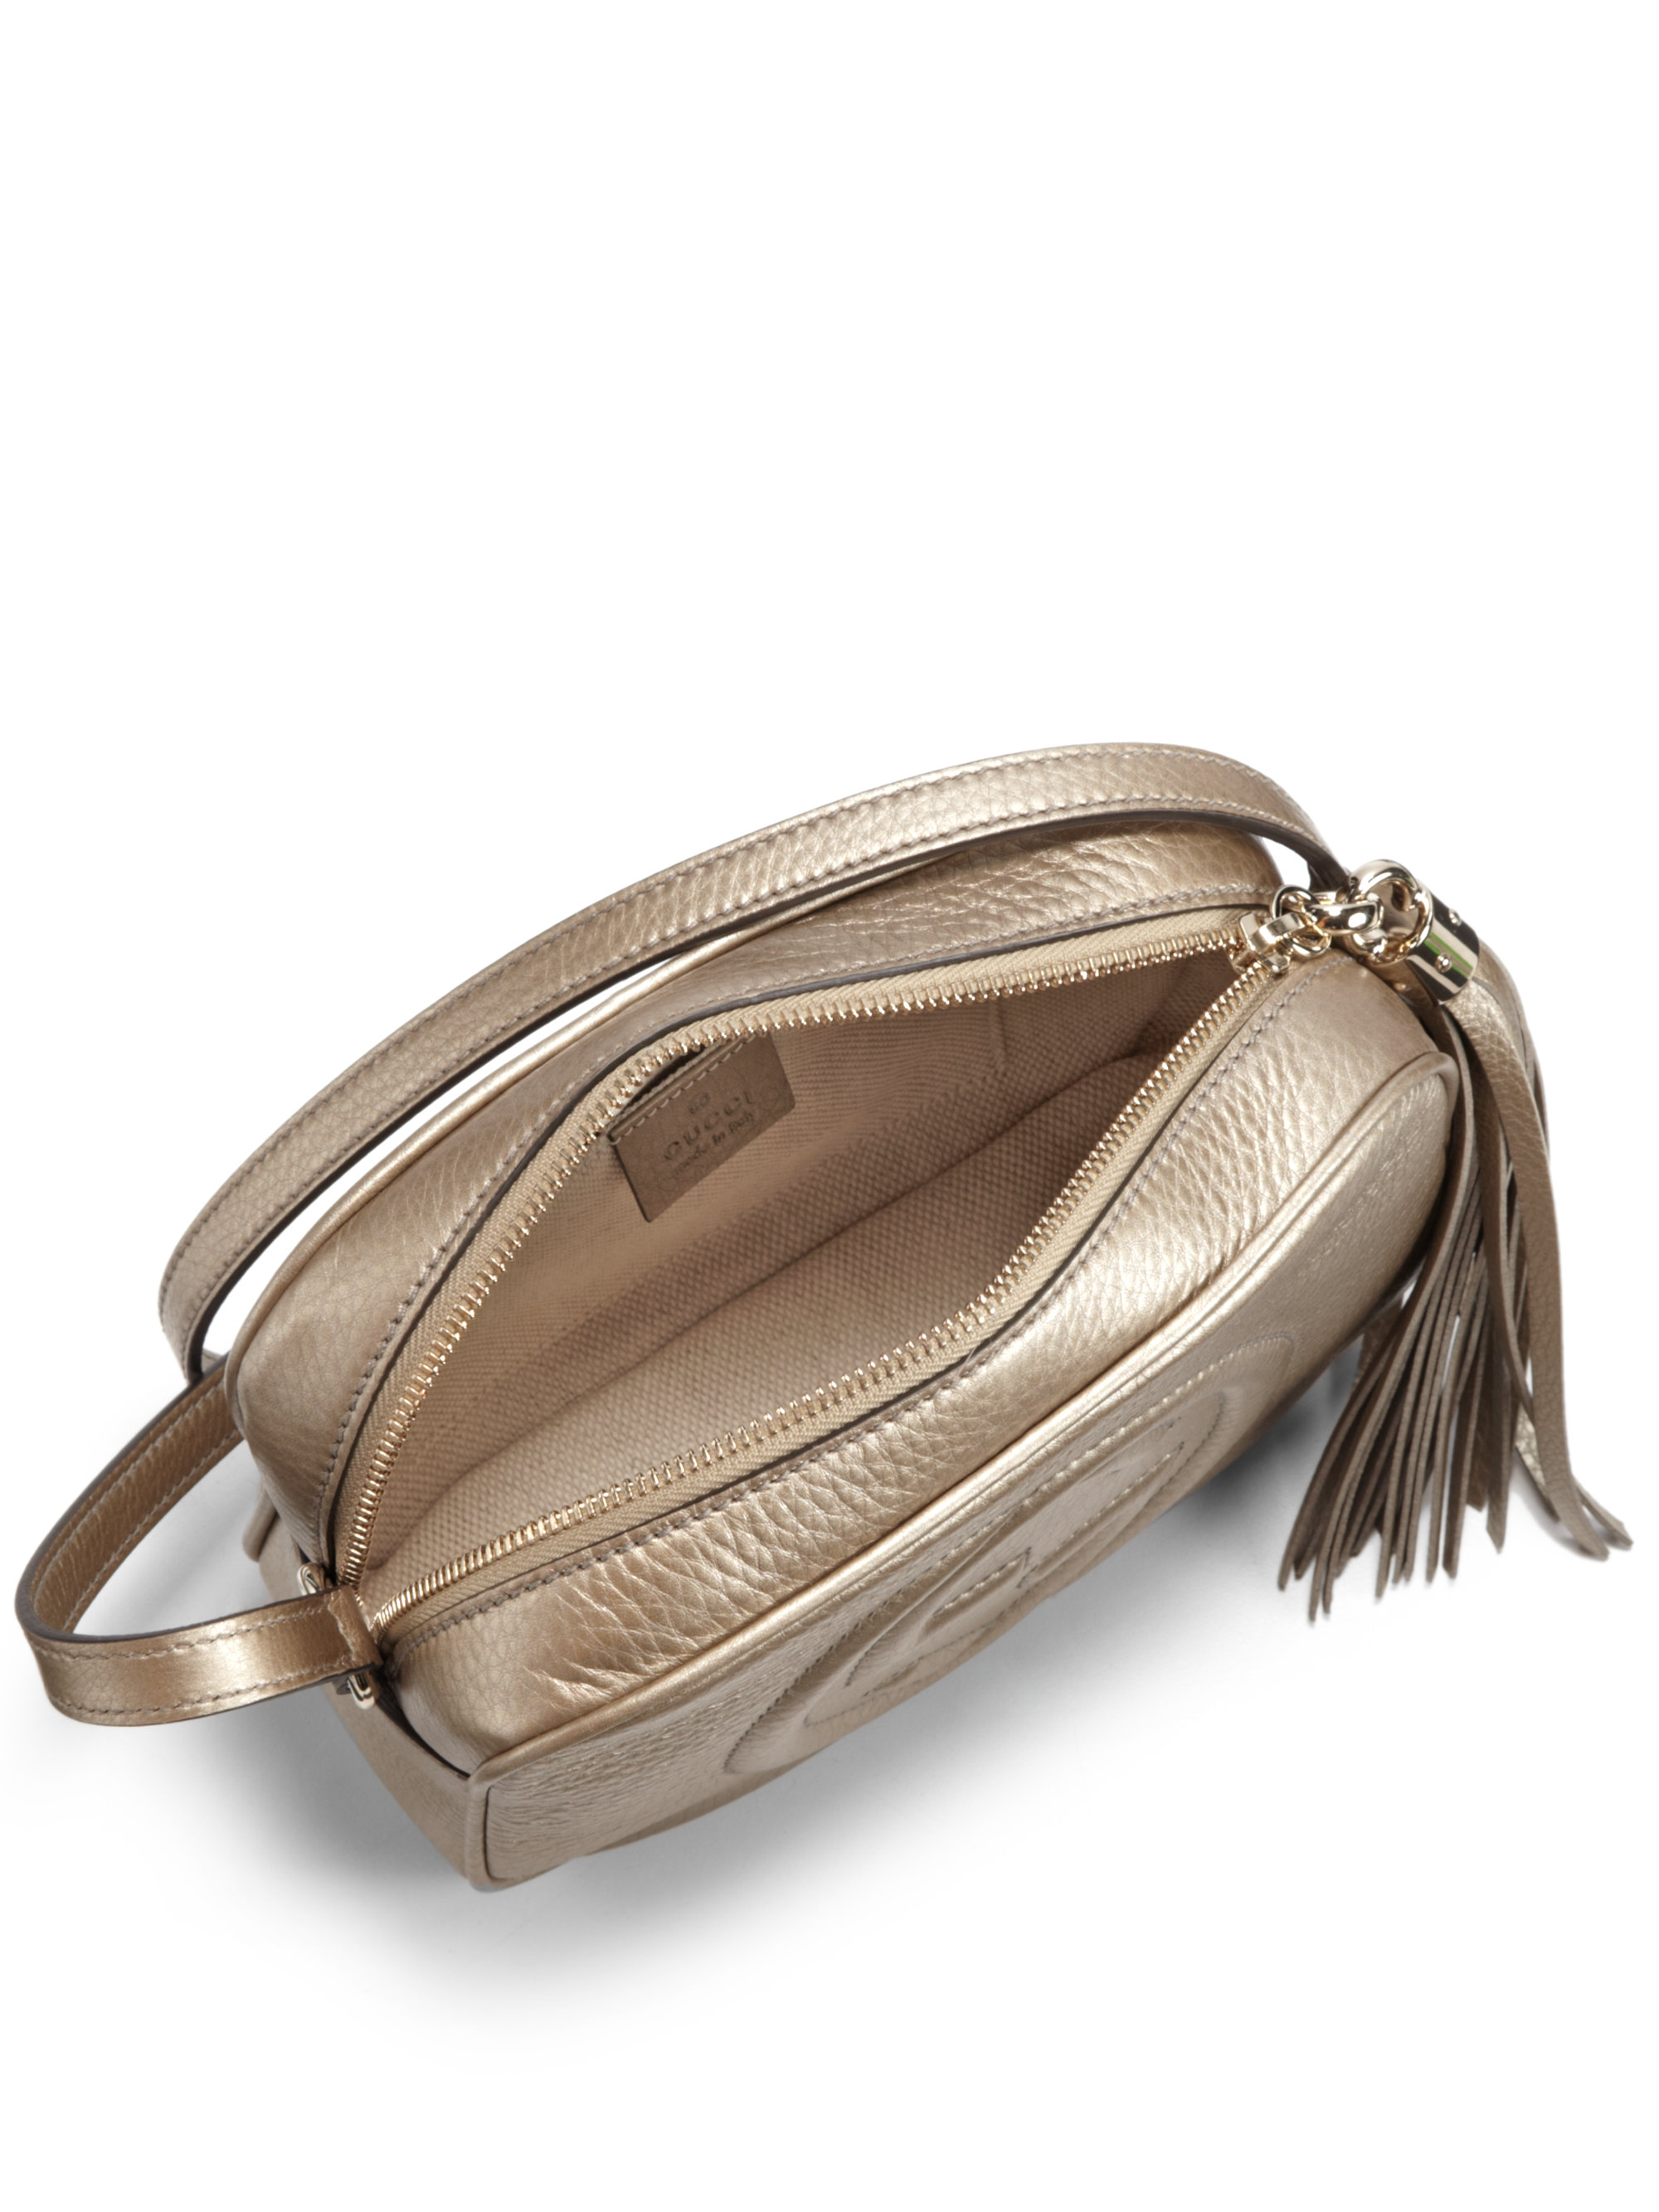 Lyst - Gucci Soho Metallic Leather Disco Bag in Natural